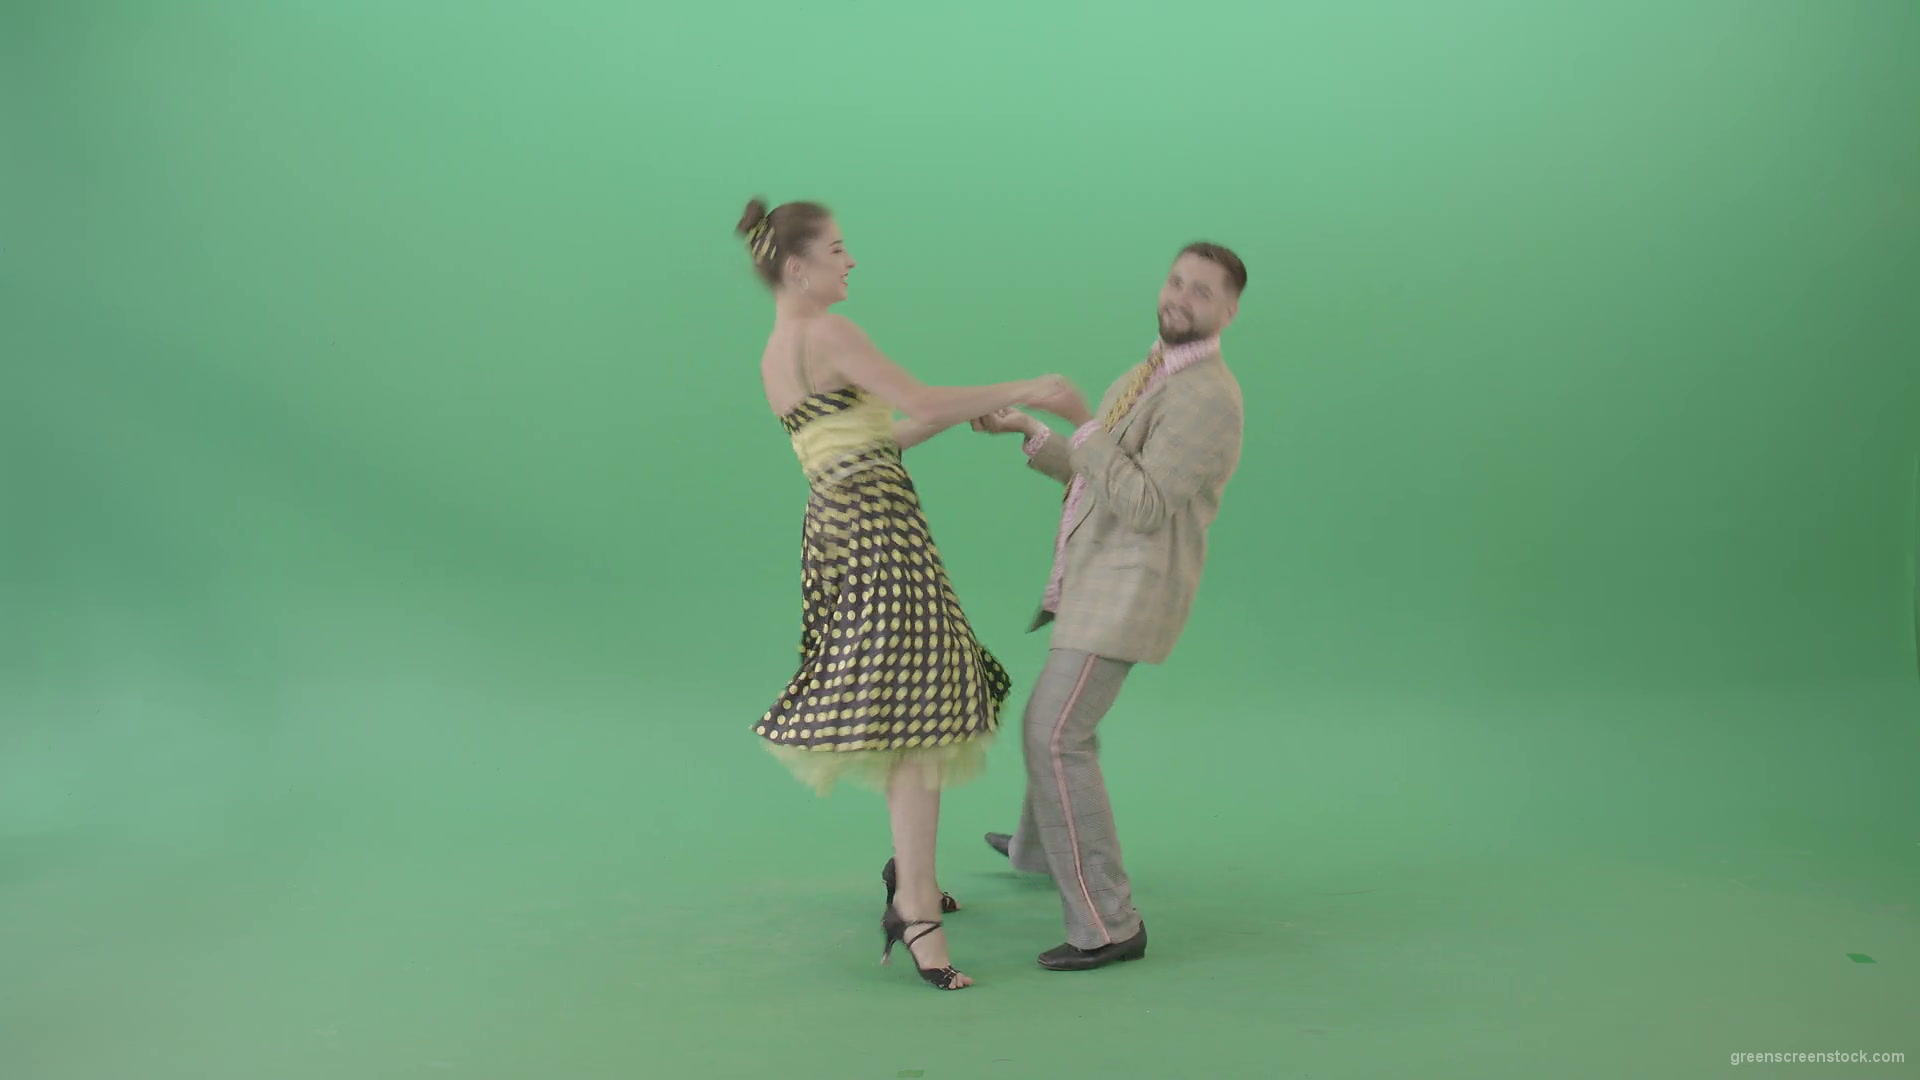 Amazing-couple-dance-Lindy-Hop-and-Rock-and-Roll-isolated-on-Green-Screen-4K-Video-Footage-1920_007 Green Screen Stock